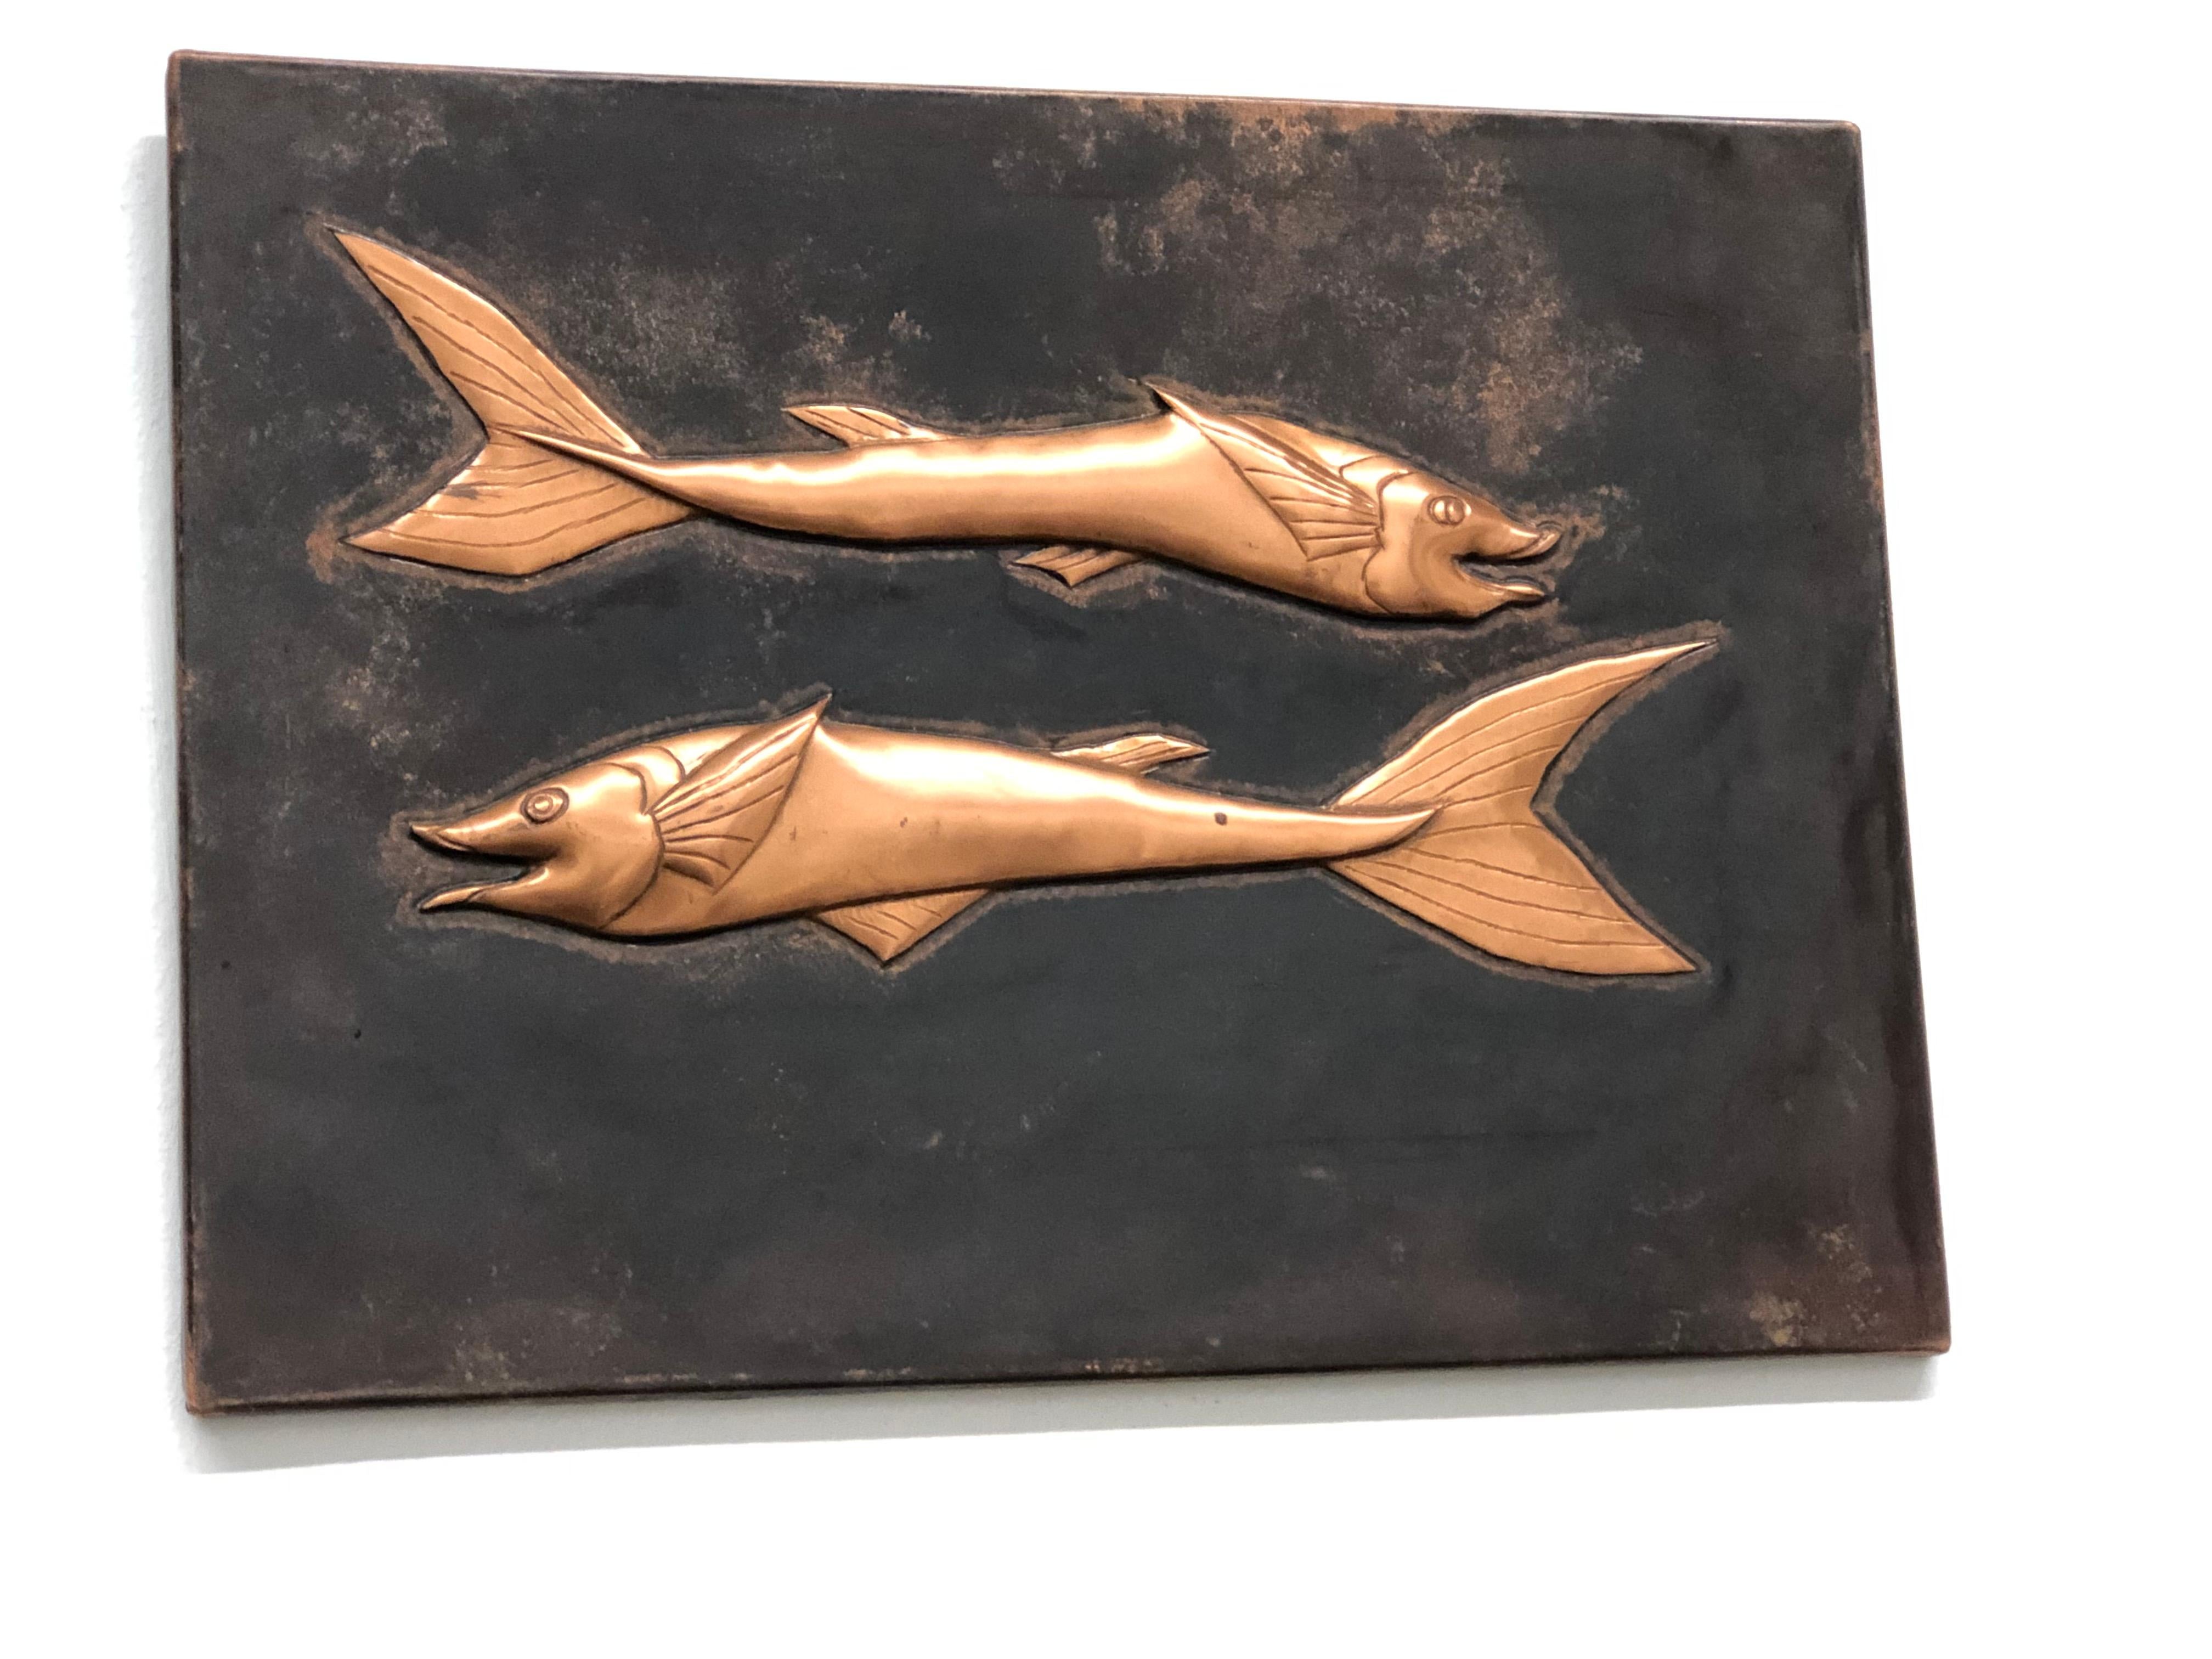 A beautiful, vintage copper Sturgeon Fish themed wall decor picture. It would make a beautiful ornament at your wall. Vibrant colors and excellent craftsmanship. Also a great wall hanging for any office or waiting area. Made in the 1970s it displays